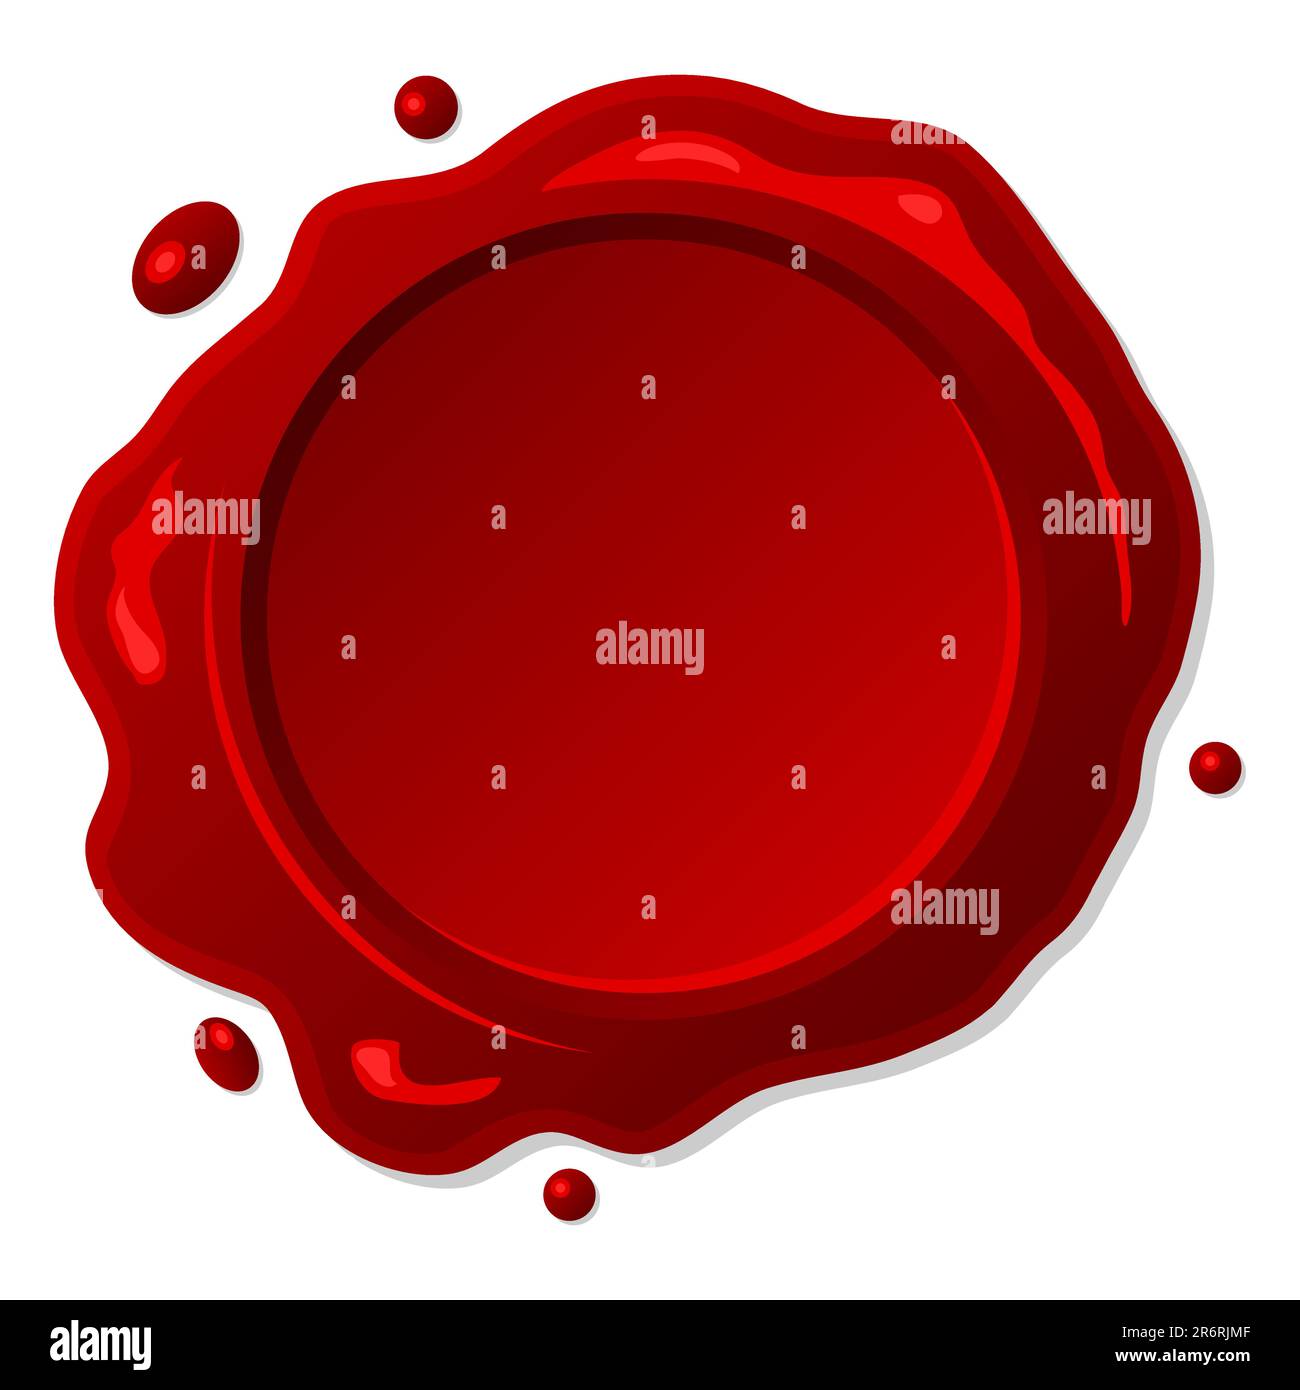 Red wax seal isolated on white background. Wax seal logo. Stamp